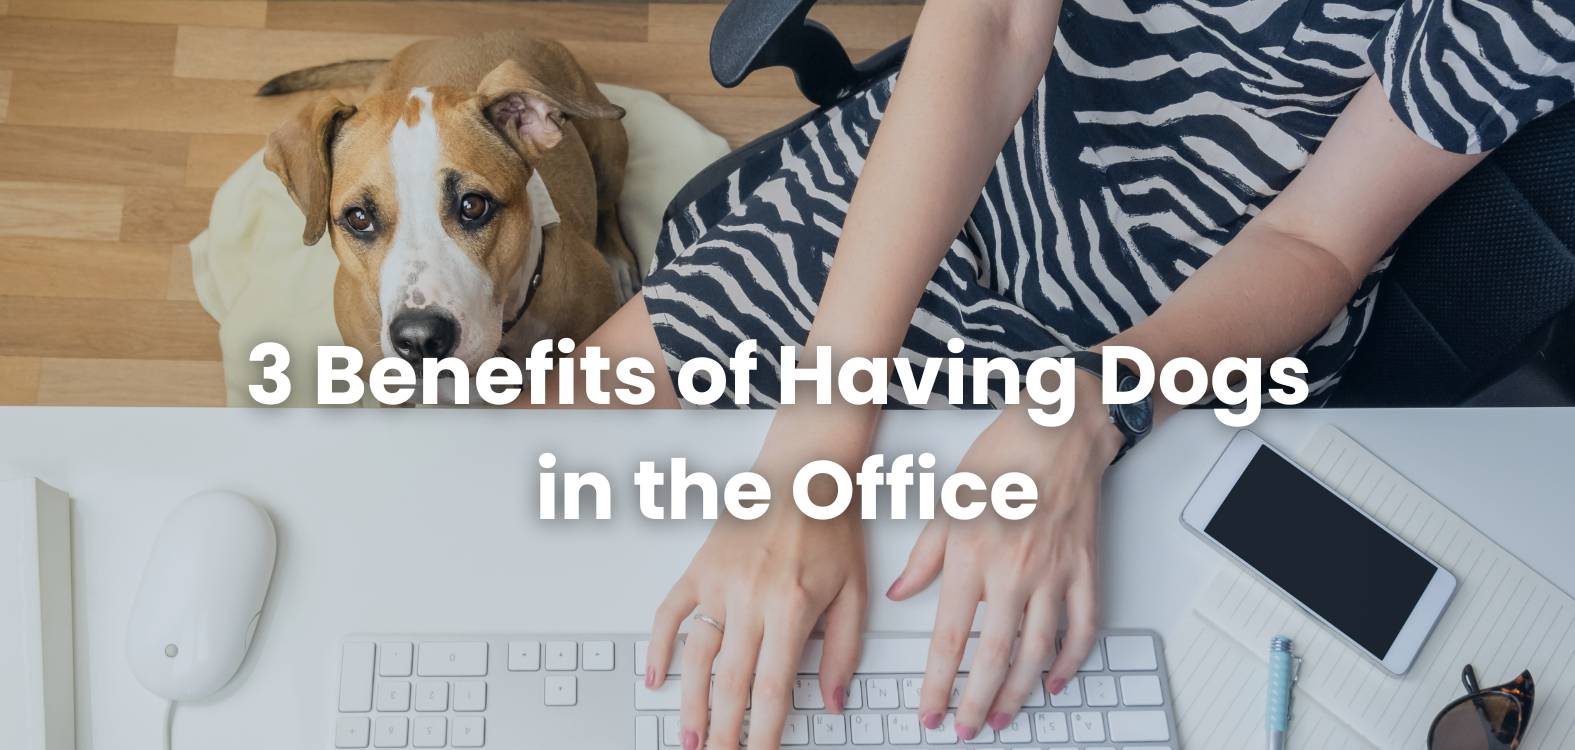 Benefits of dogs in the office